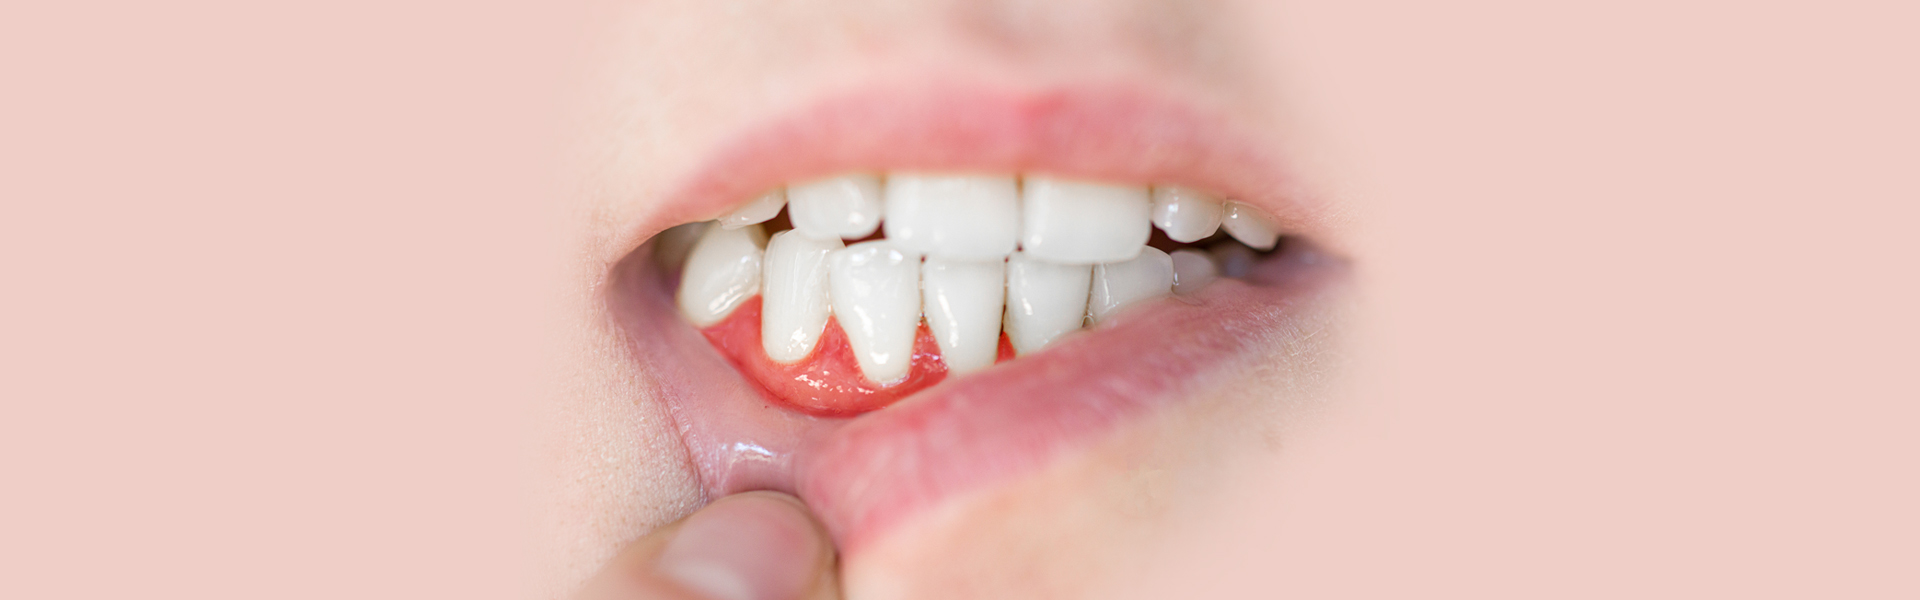 How to Deal with a Chipped Tooth at Gum Line and No Pain?